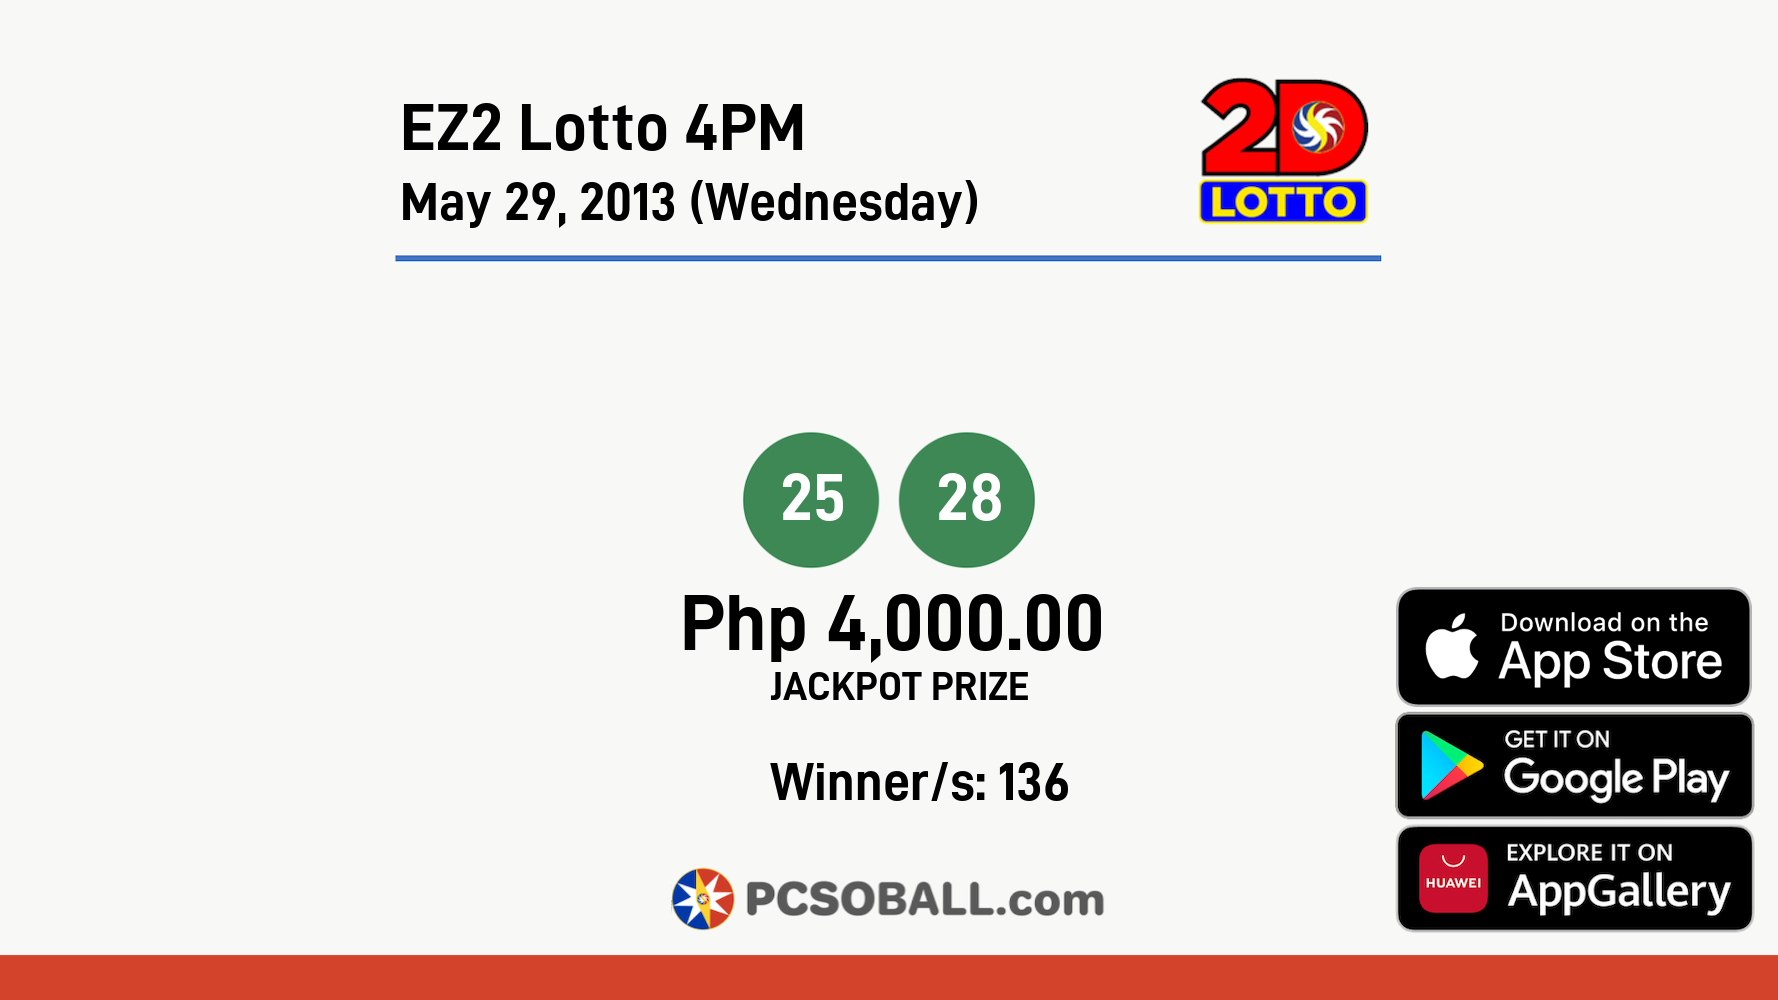 EZ2 Lotto 4PM May 29, 2013 (Wednesday) Result